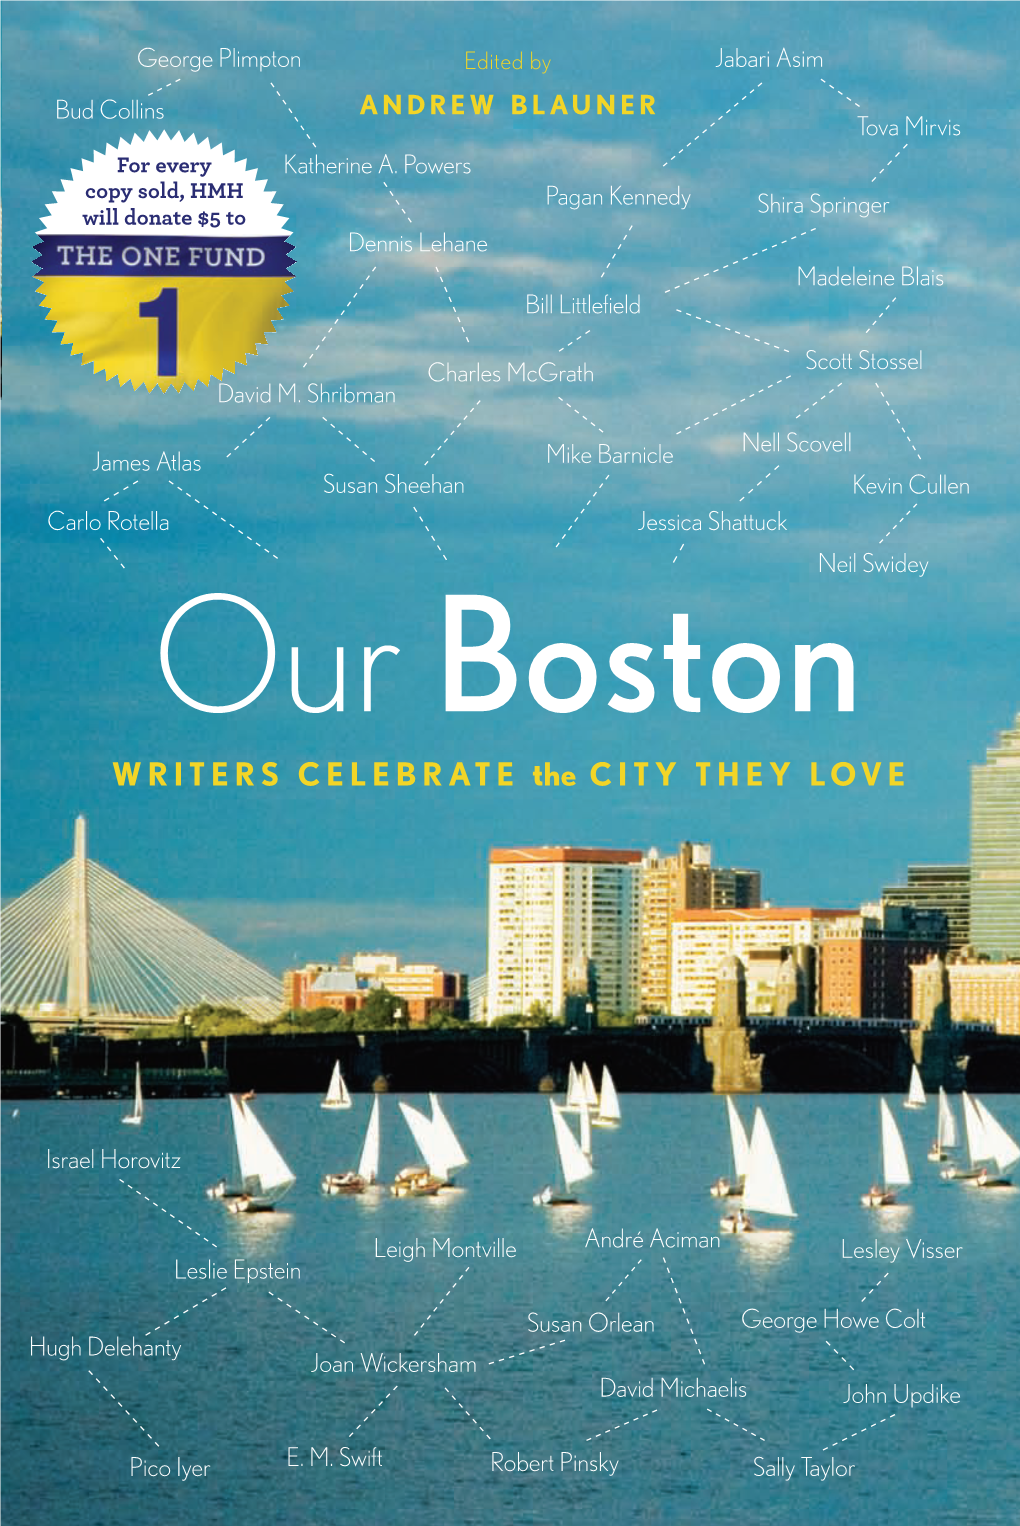 Our Boston Tova Mirvis “Our Boston Is a Stellar Anthology, a Love Letter to a for Every Katherine A